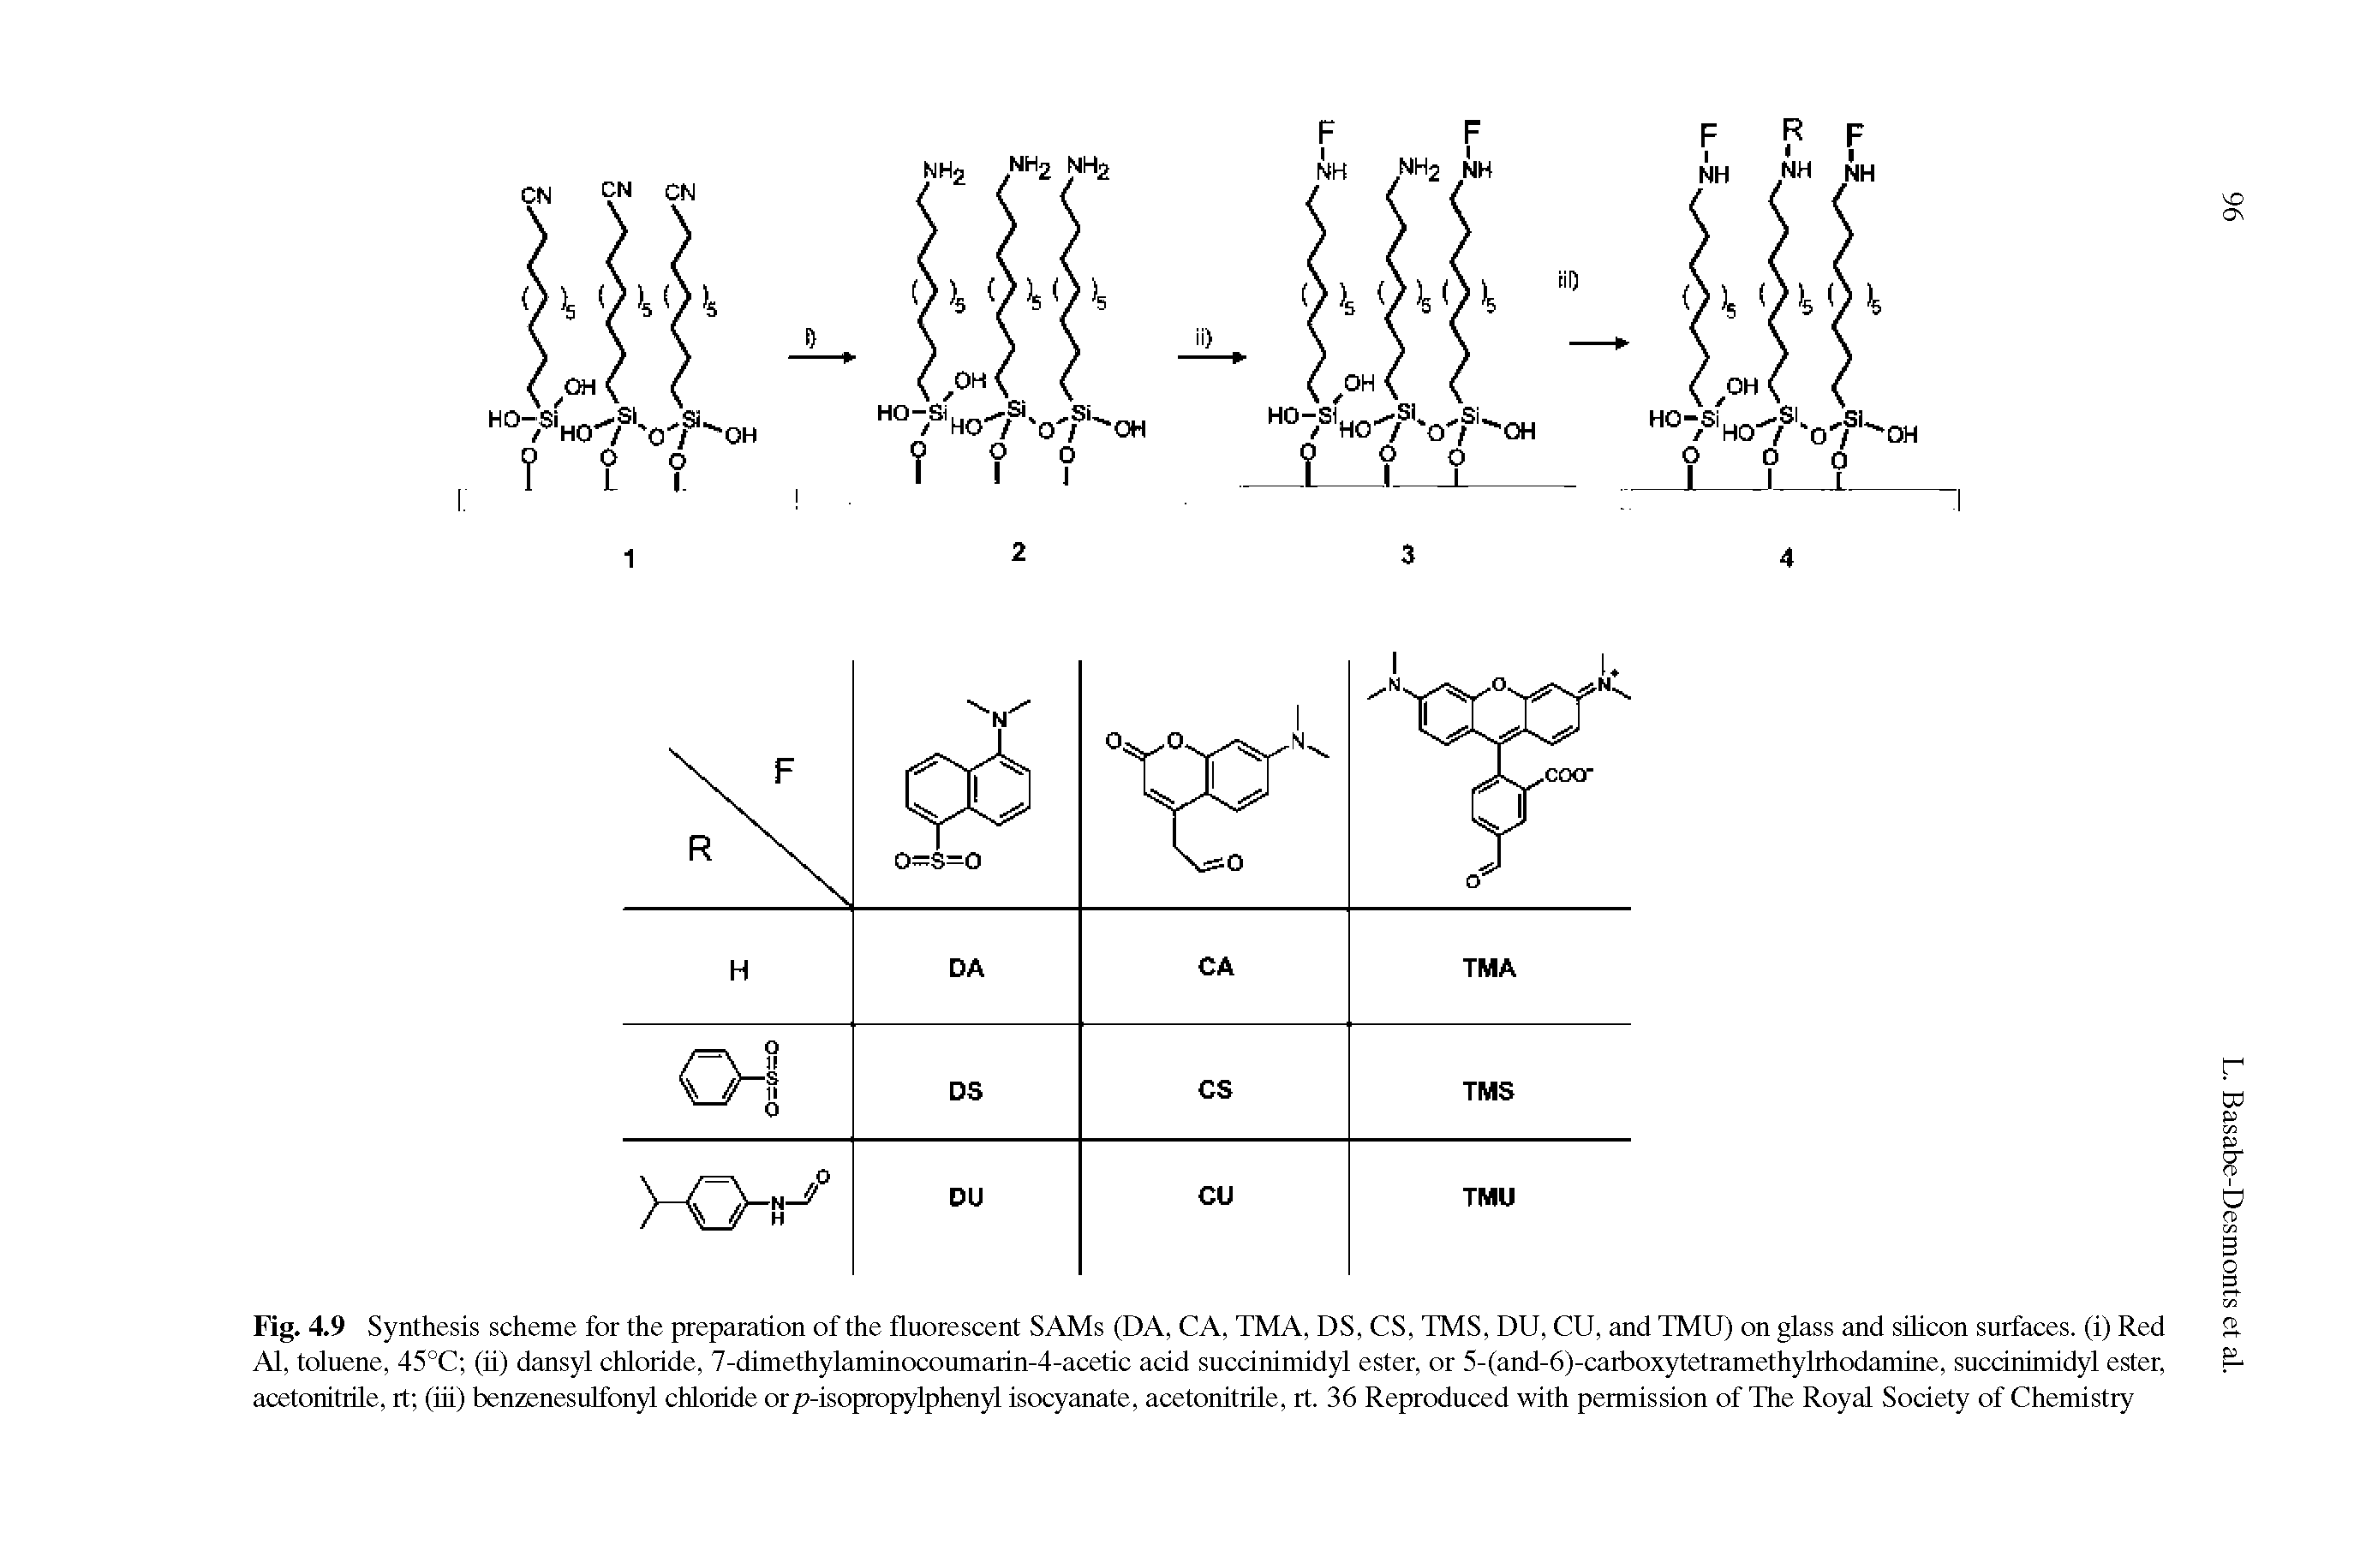 Fig. 4.9 Synthesis scheme for the preparation of the fluorescent SAMs (DA, CA, TMA, DS, CS, TMS, DU, CU, and TMU) on glass and silicon surfaces, (i) Red Al, toluene, 45°C (ii) dansyl chloride, 7-dimethylaminocoumarin-4-acetic acid succinimidyl ester, or 5-(and-6)-carboxytetramethylrhodamine, succinimidyl ester, acetonitrile, rt (iii) benzenesulfonyl chloride orp-isopropylphenyl isocyanate, acetonitrile, rt. 36 Reproduced with permission of The Royal Society of Chemistry...